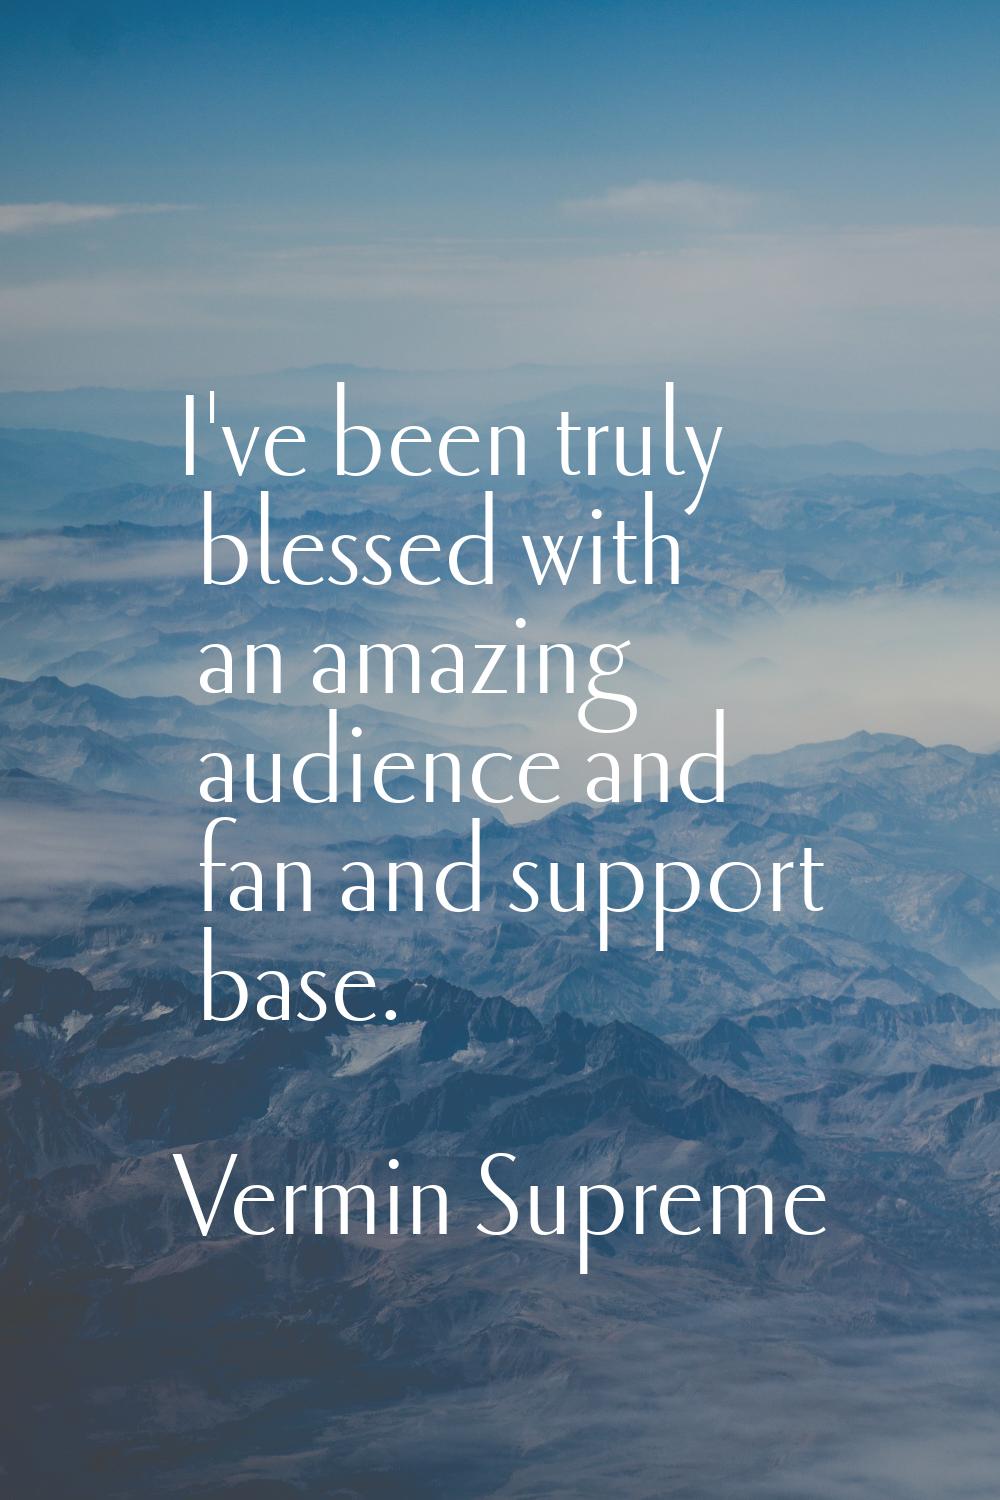 I've been truly blessed with an amazing audience and fan and support base.